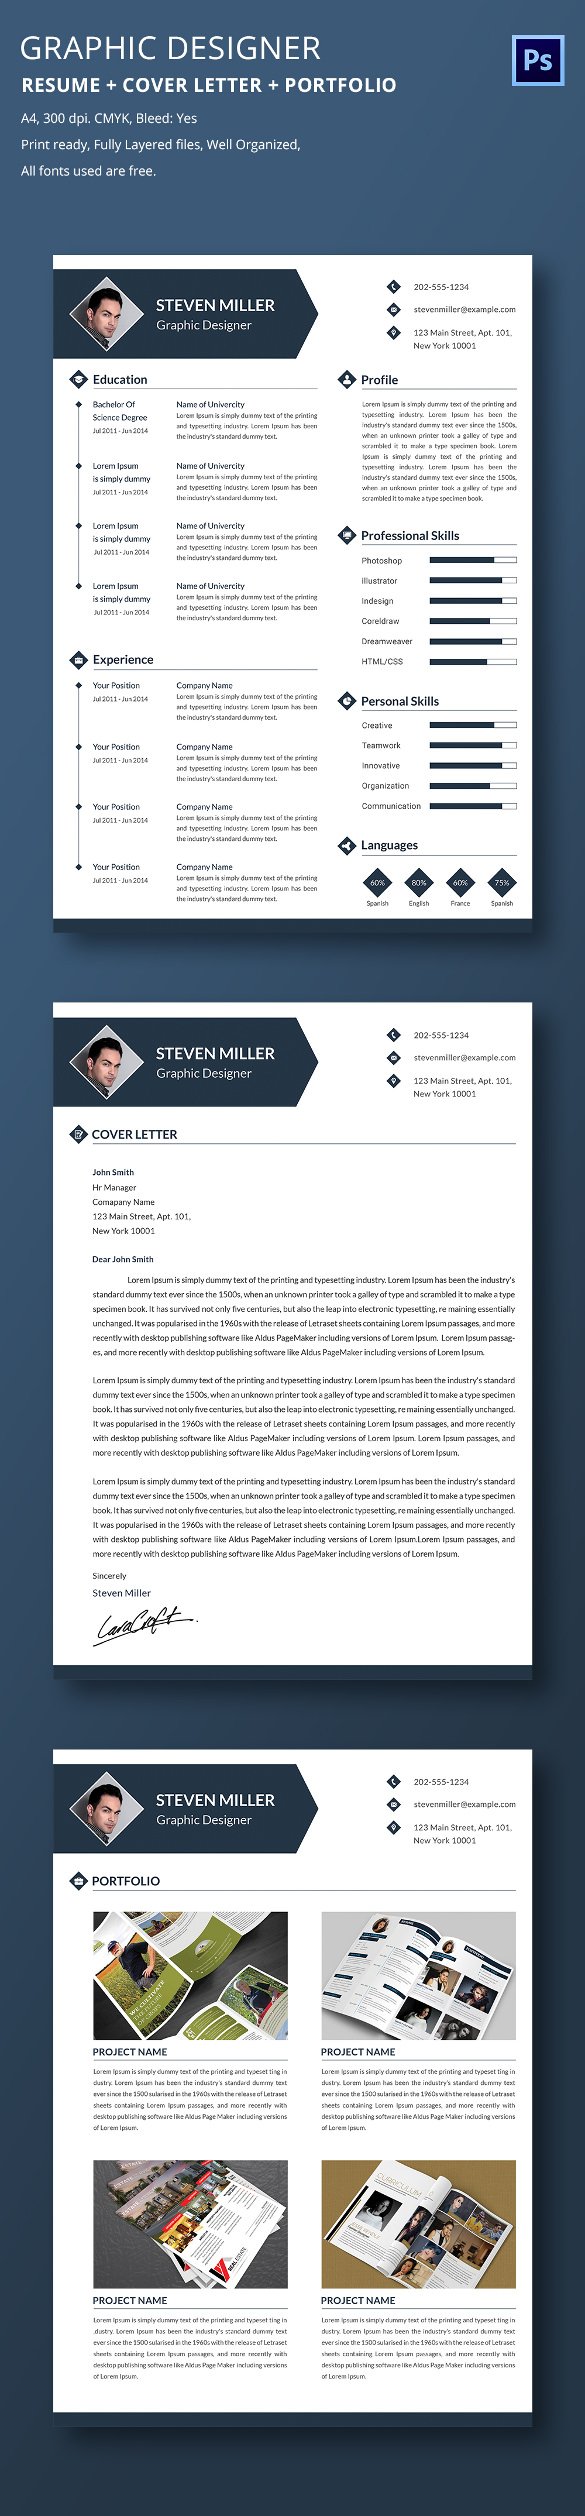 28+ Resume Templates for Freshers - Free Samples, Examples, & Formats Download | Free & Premium ...